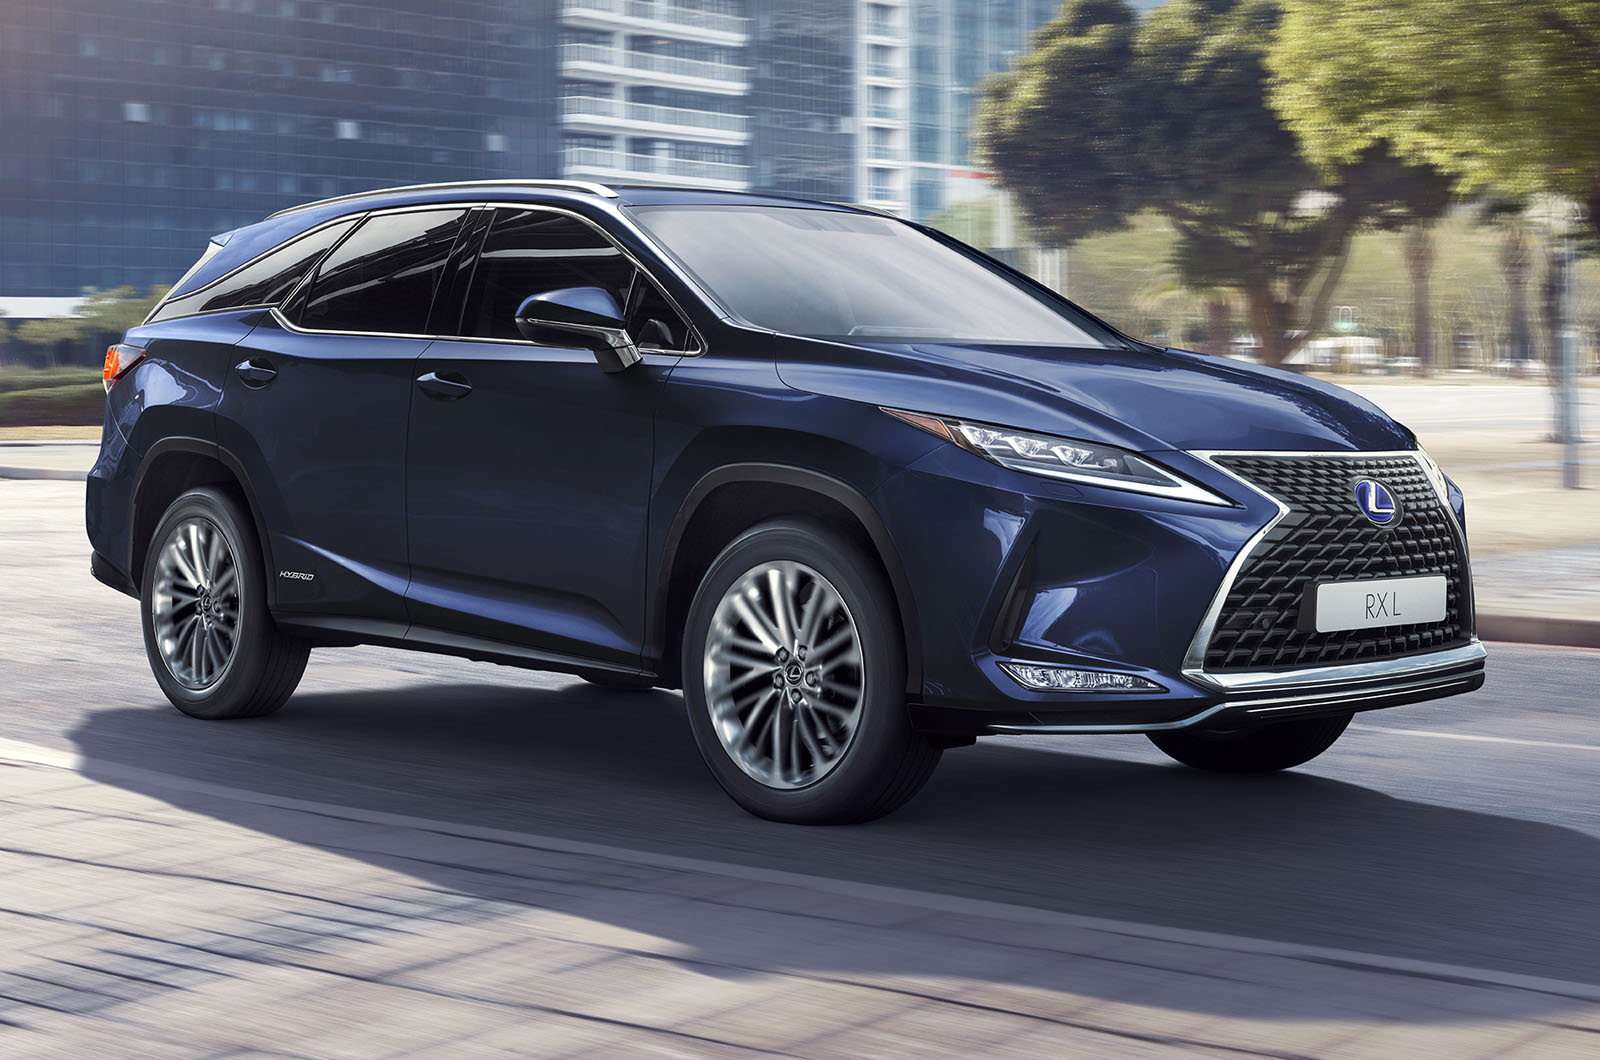 Lexus RX updated for 2020 with styling and chassis tweaks | Autocar